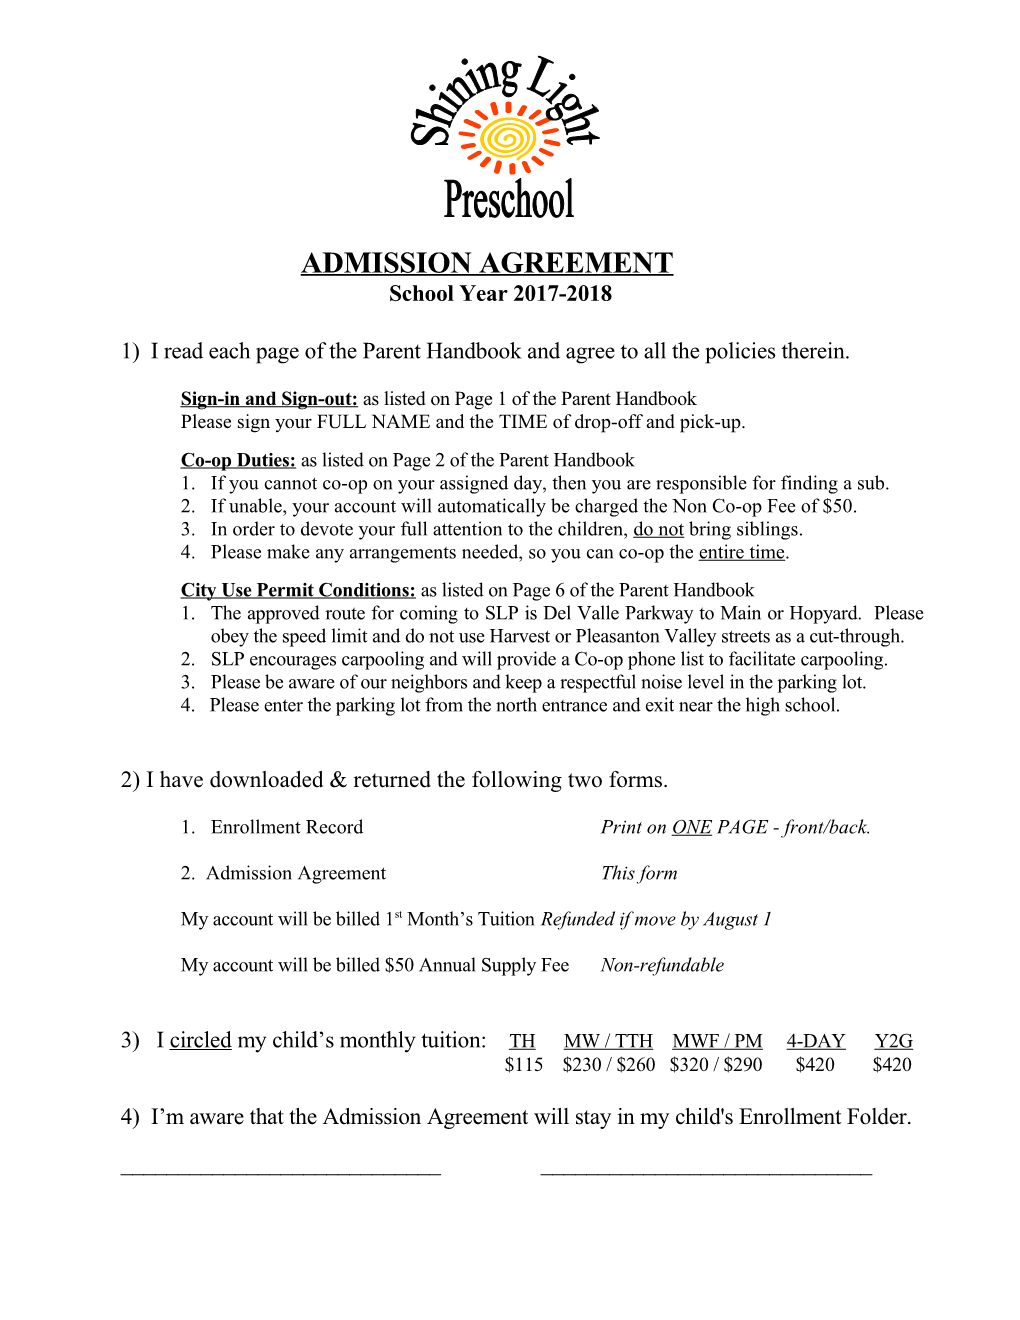 ADMISSION AGREEMENT for 1998-1999 SCHOOL YEAR